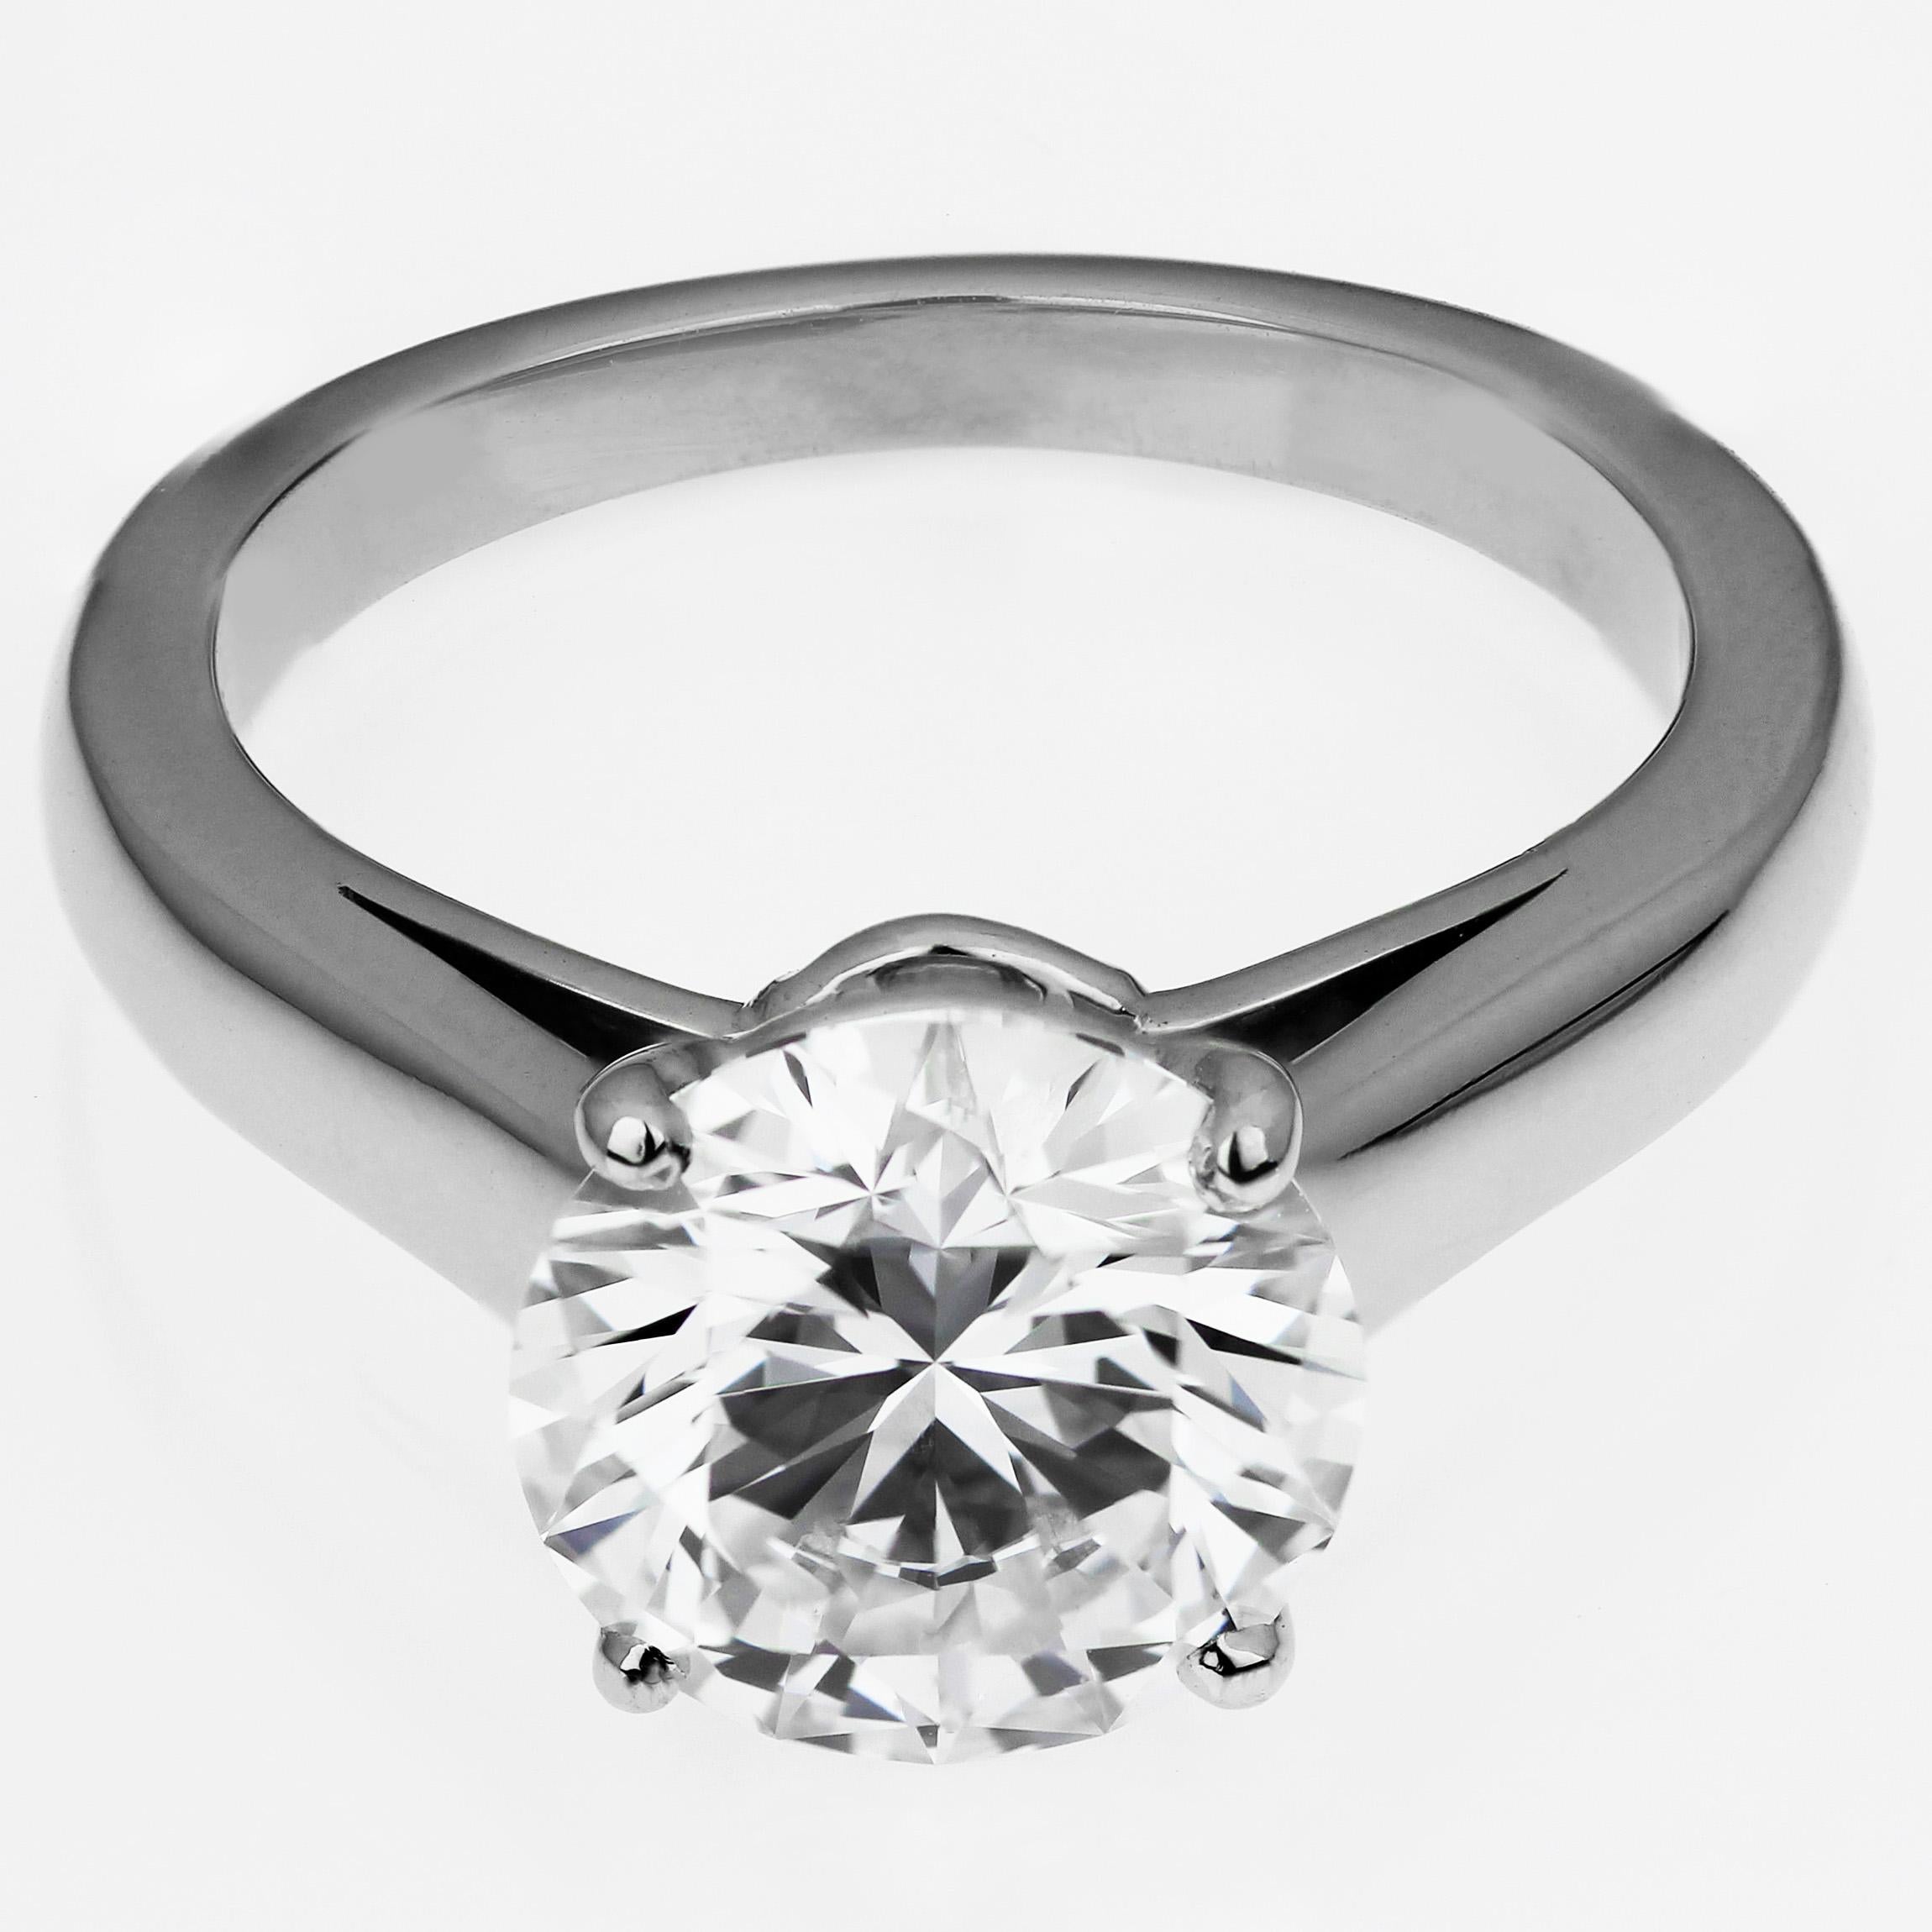 A diamond single stone solitaire ring set in platinum by Cartier with original box, receipts and Certificate. Featuring an impressive four-claw set round brilliant cut diamond, weight 2.43 ct with GIA Report no. 5131336188, laser inscribed girdle, F